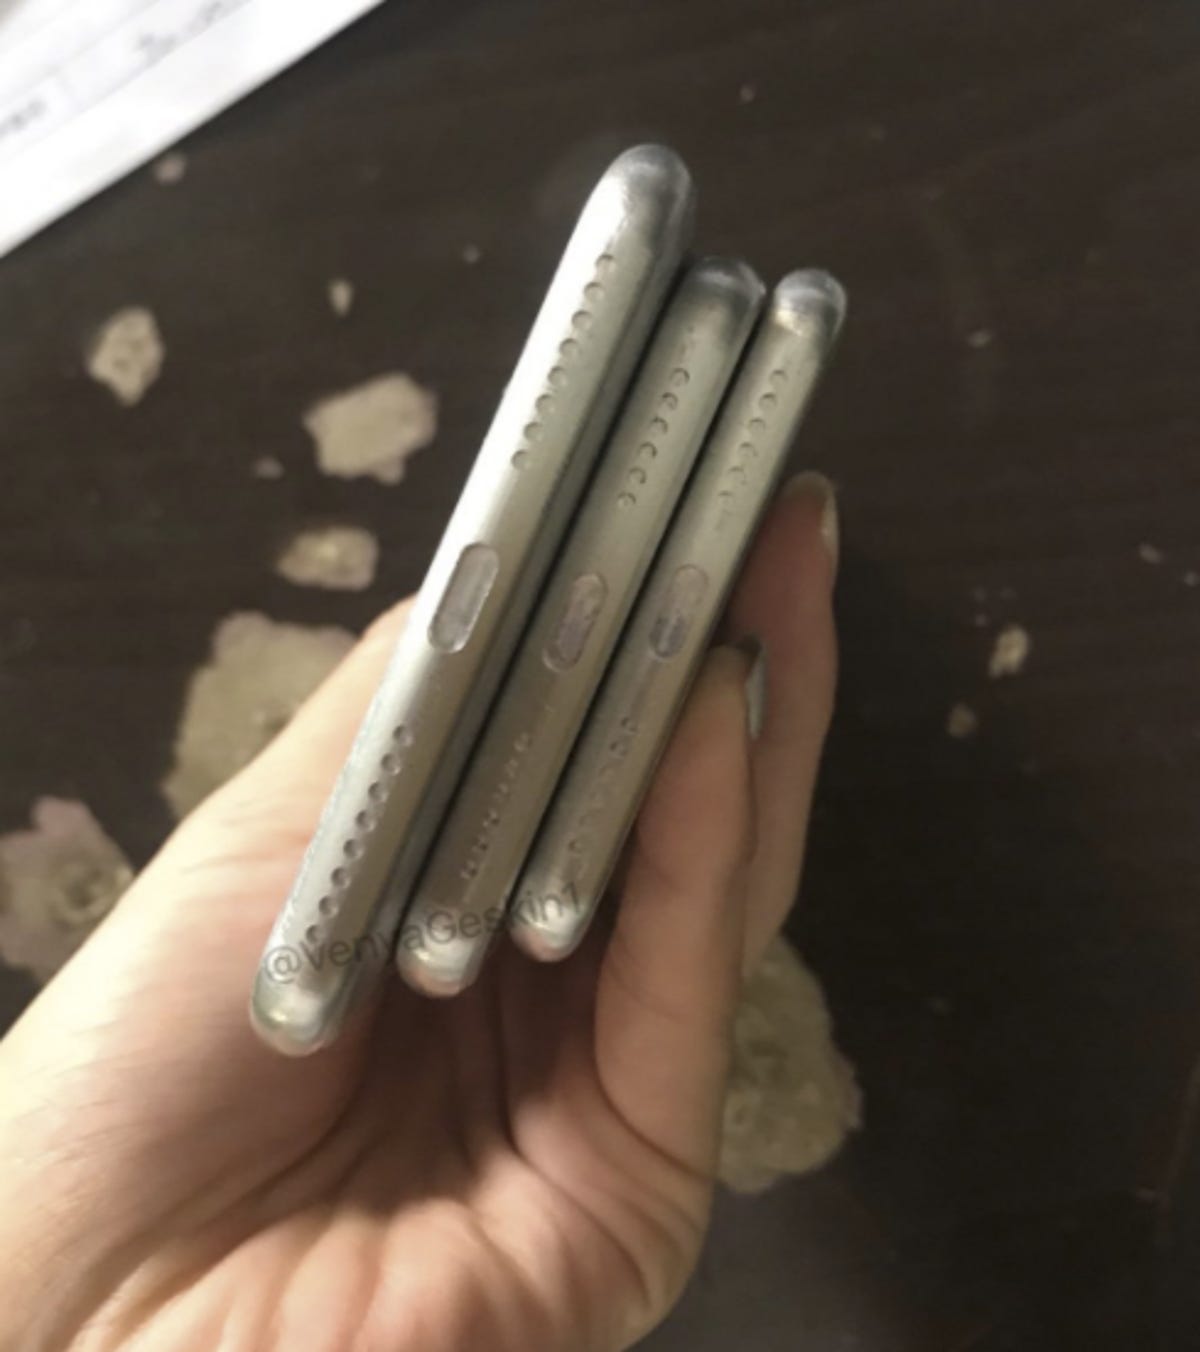 iPhone 8 molds